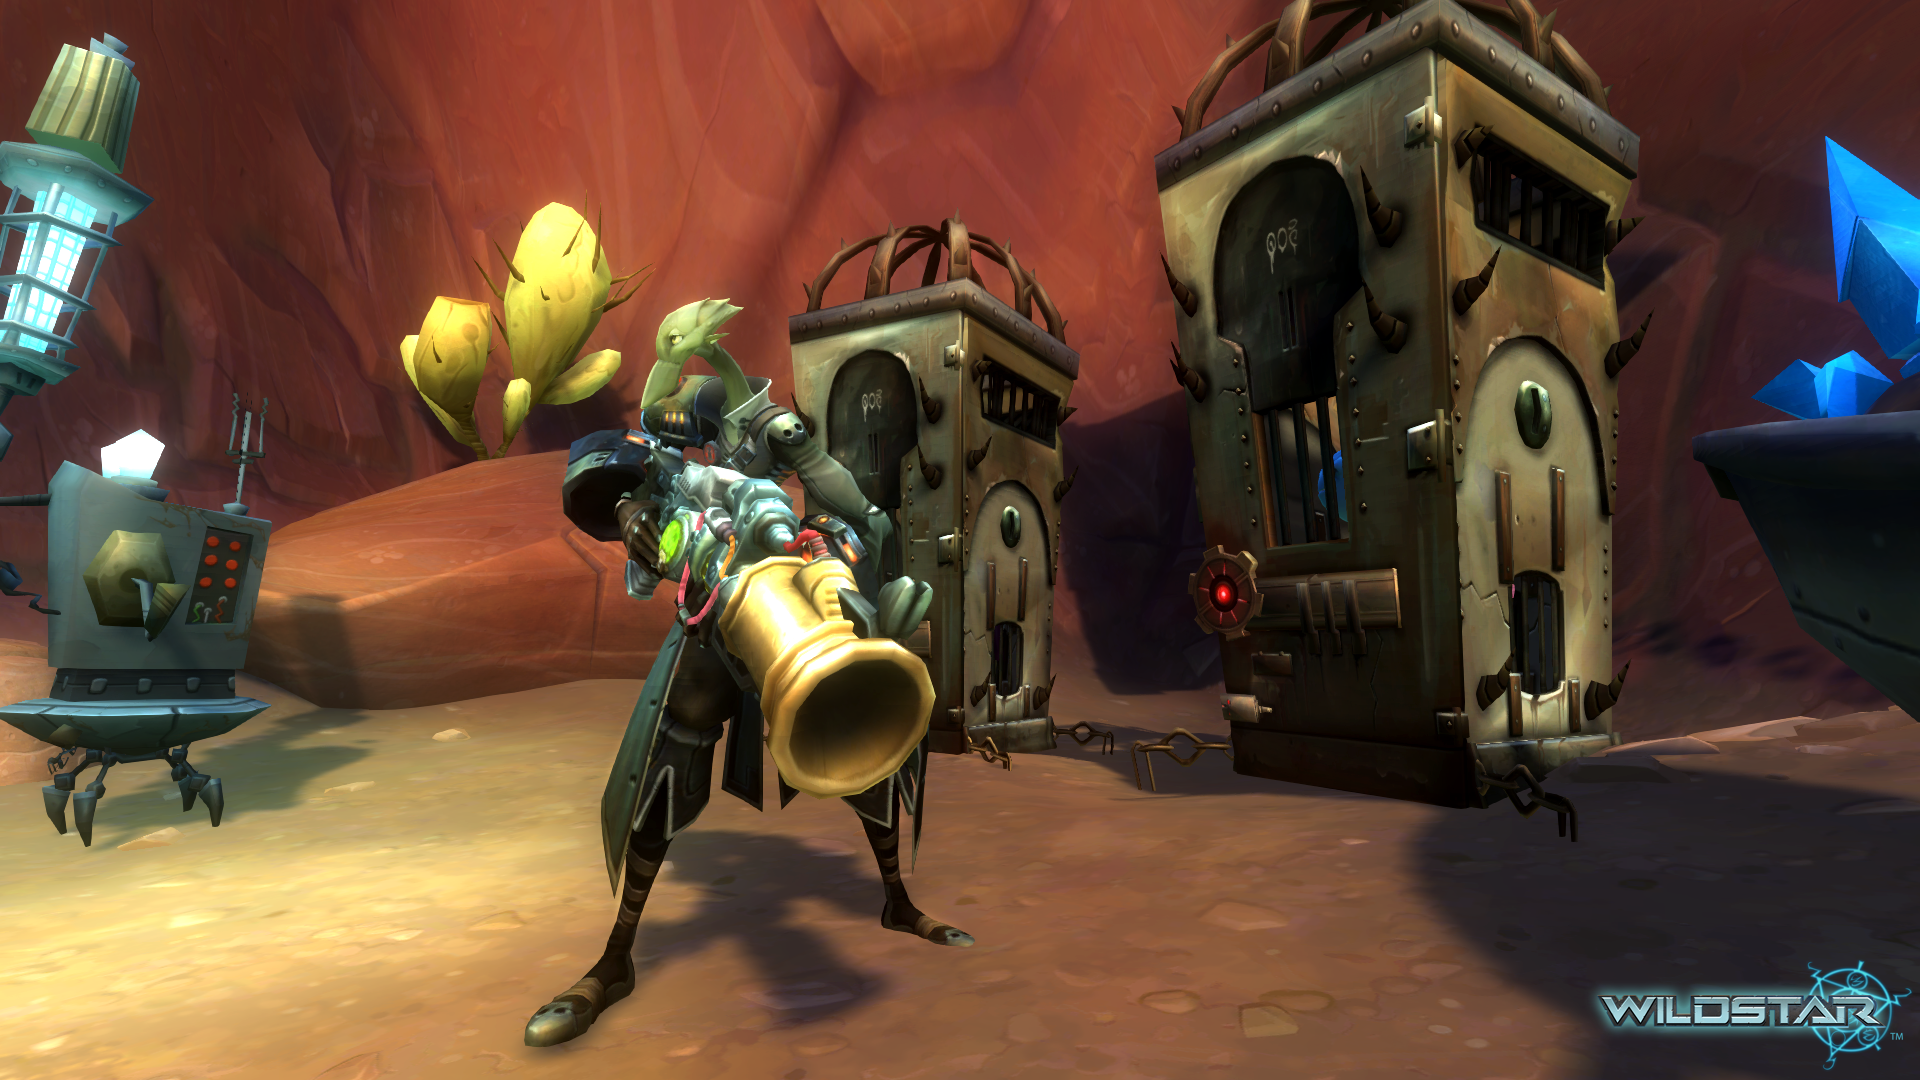 Does WildStar Credd system work the same way as buying gold.